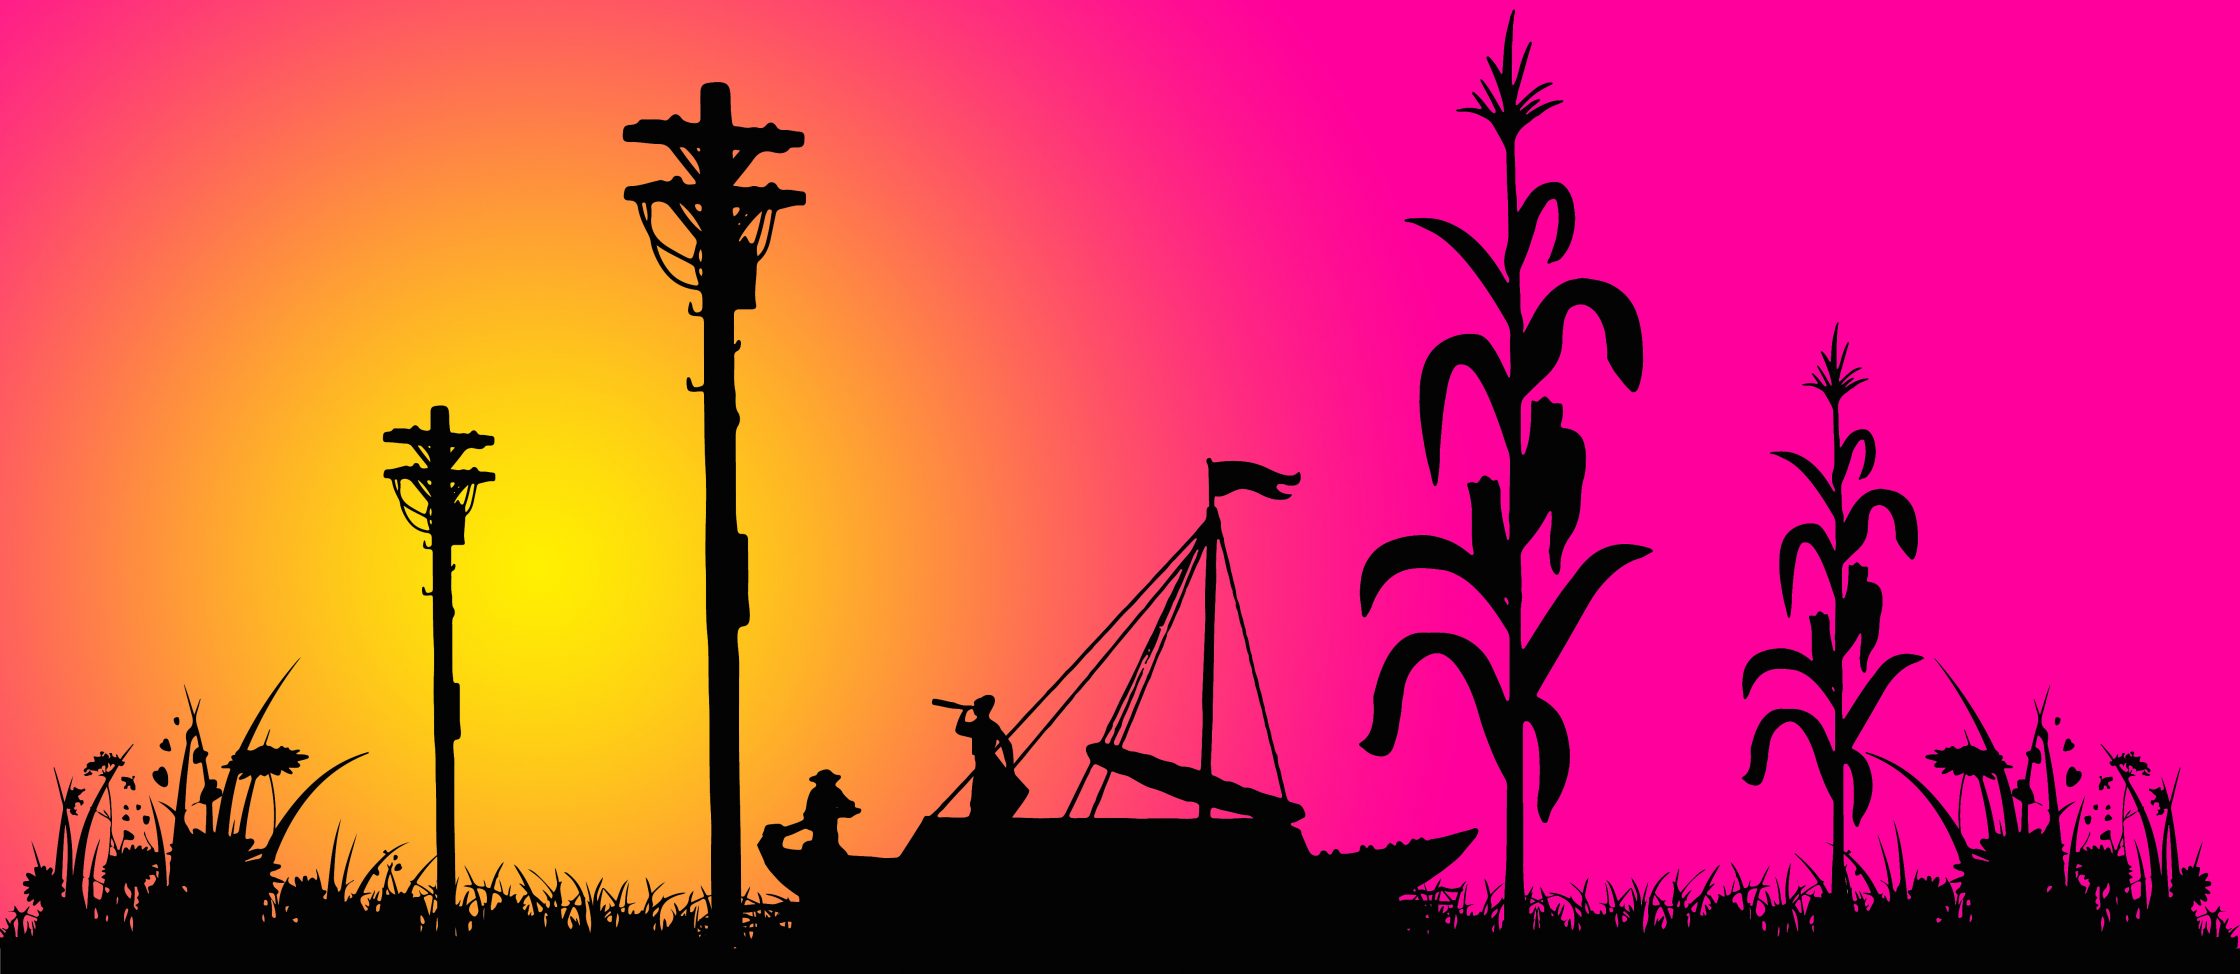 silhouette of corn, telephone poles, weeds and a keelboat